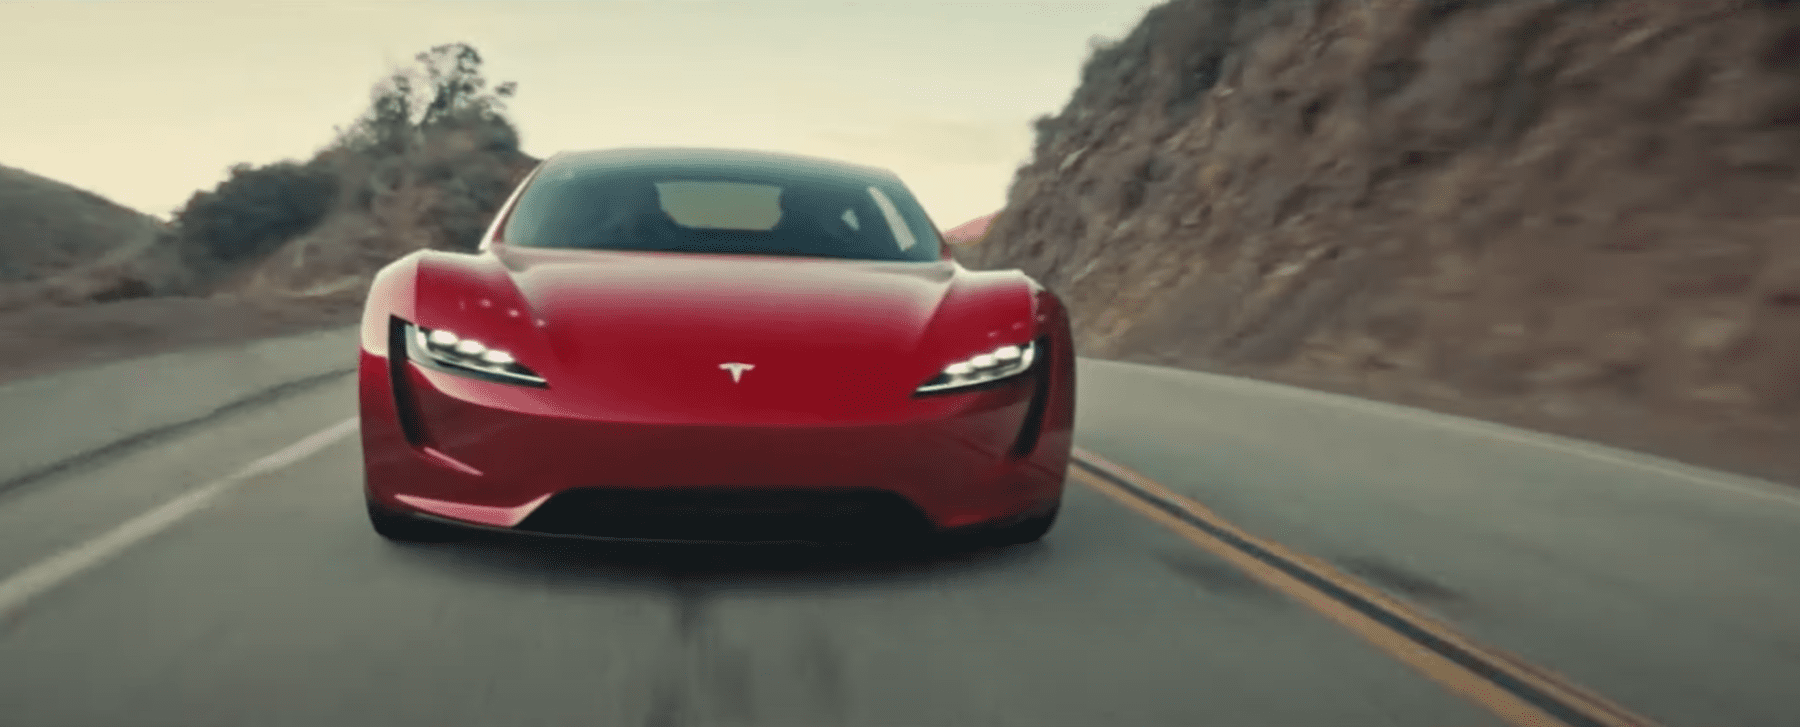 last call this fan made tesla ad is seriously impressive